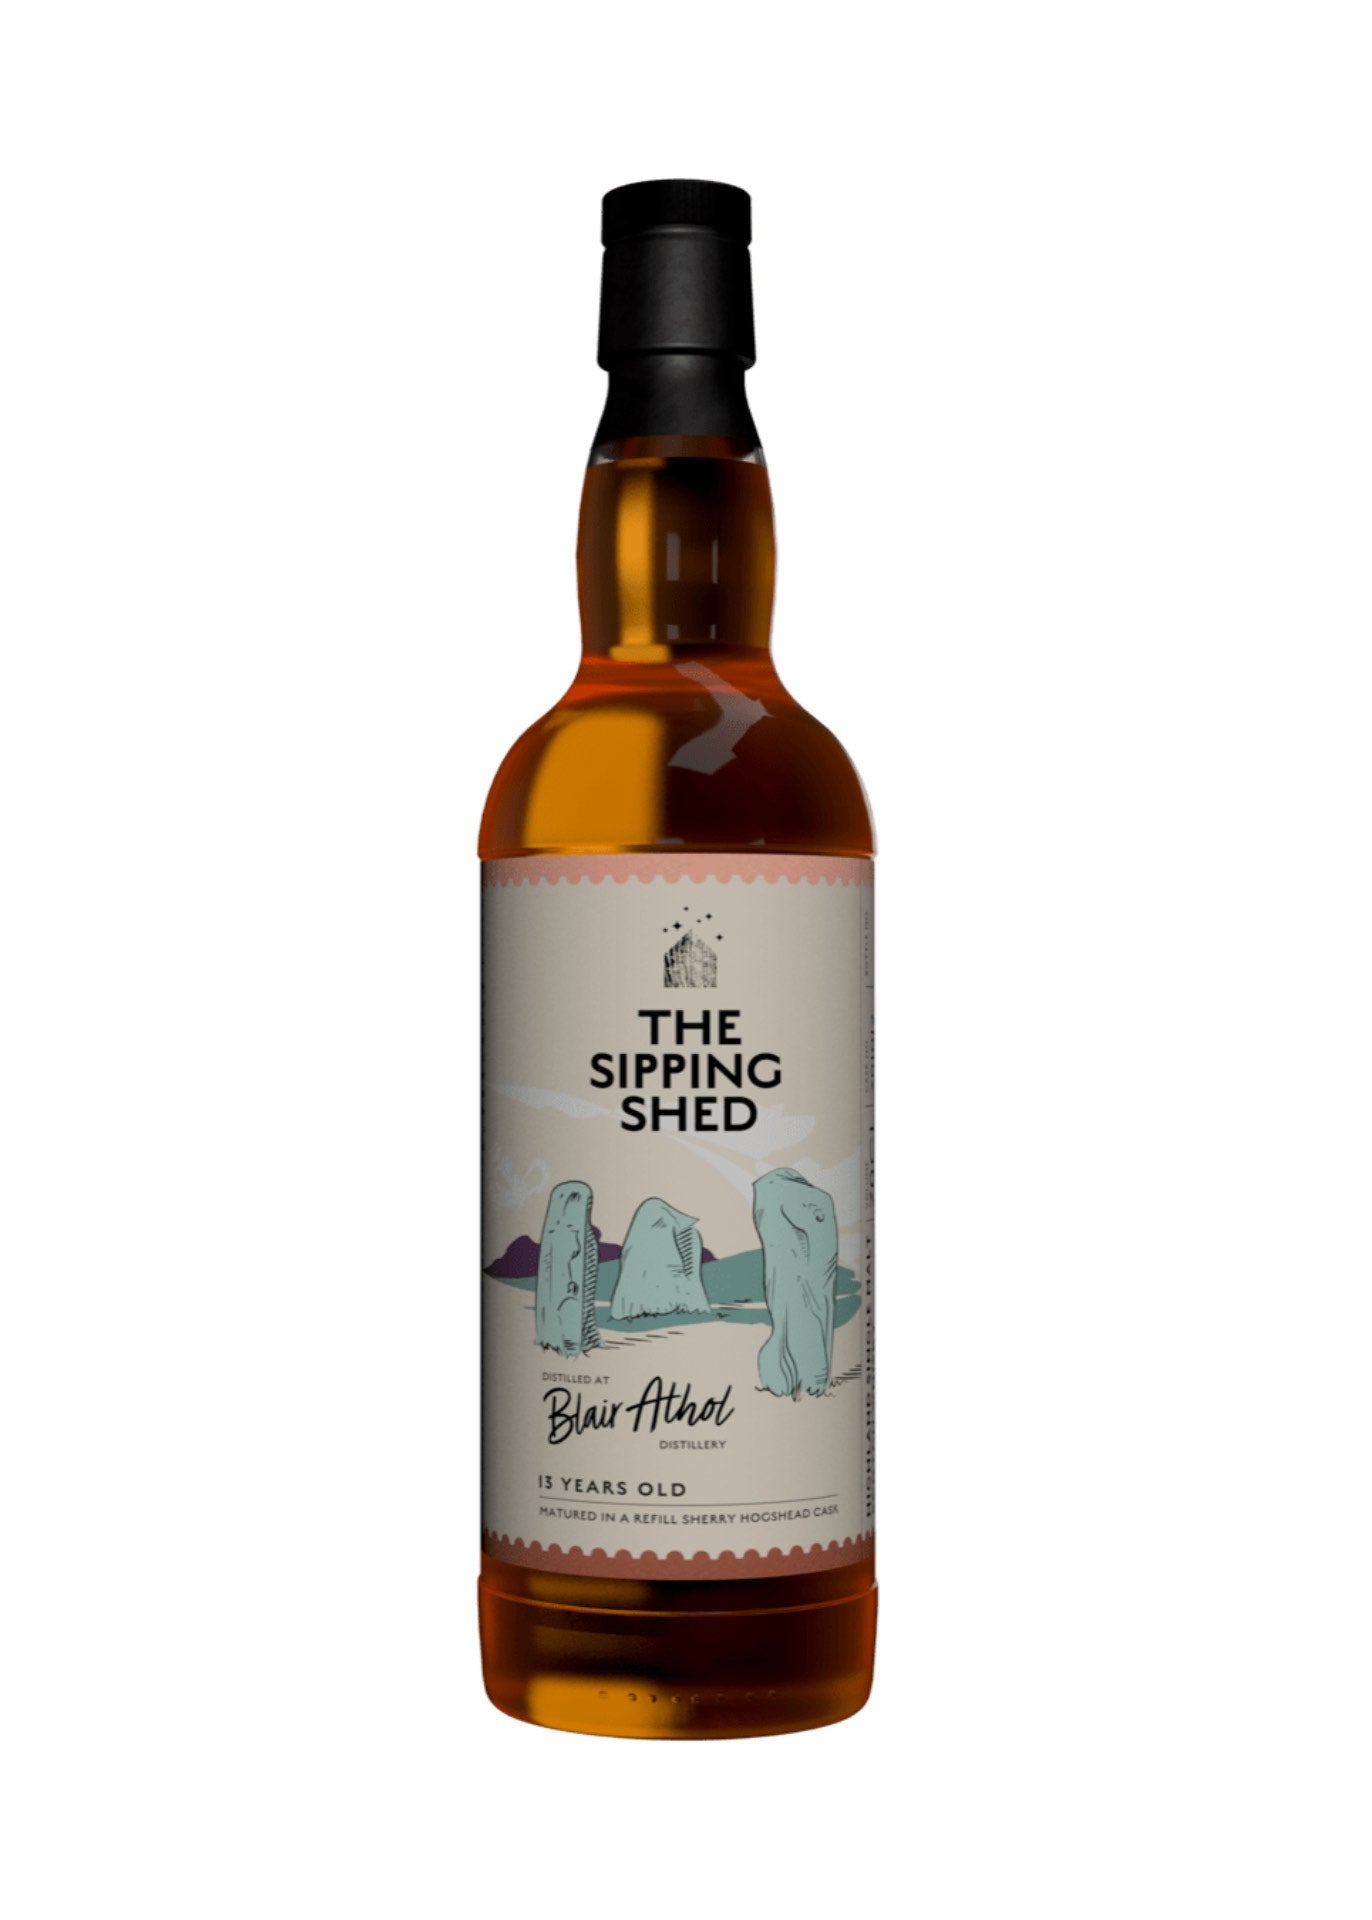 The Sipping Shed Blair Athol 13 Year Old